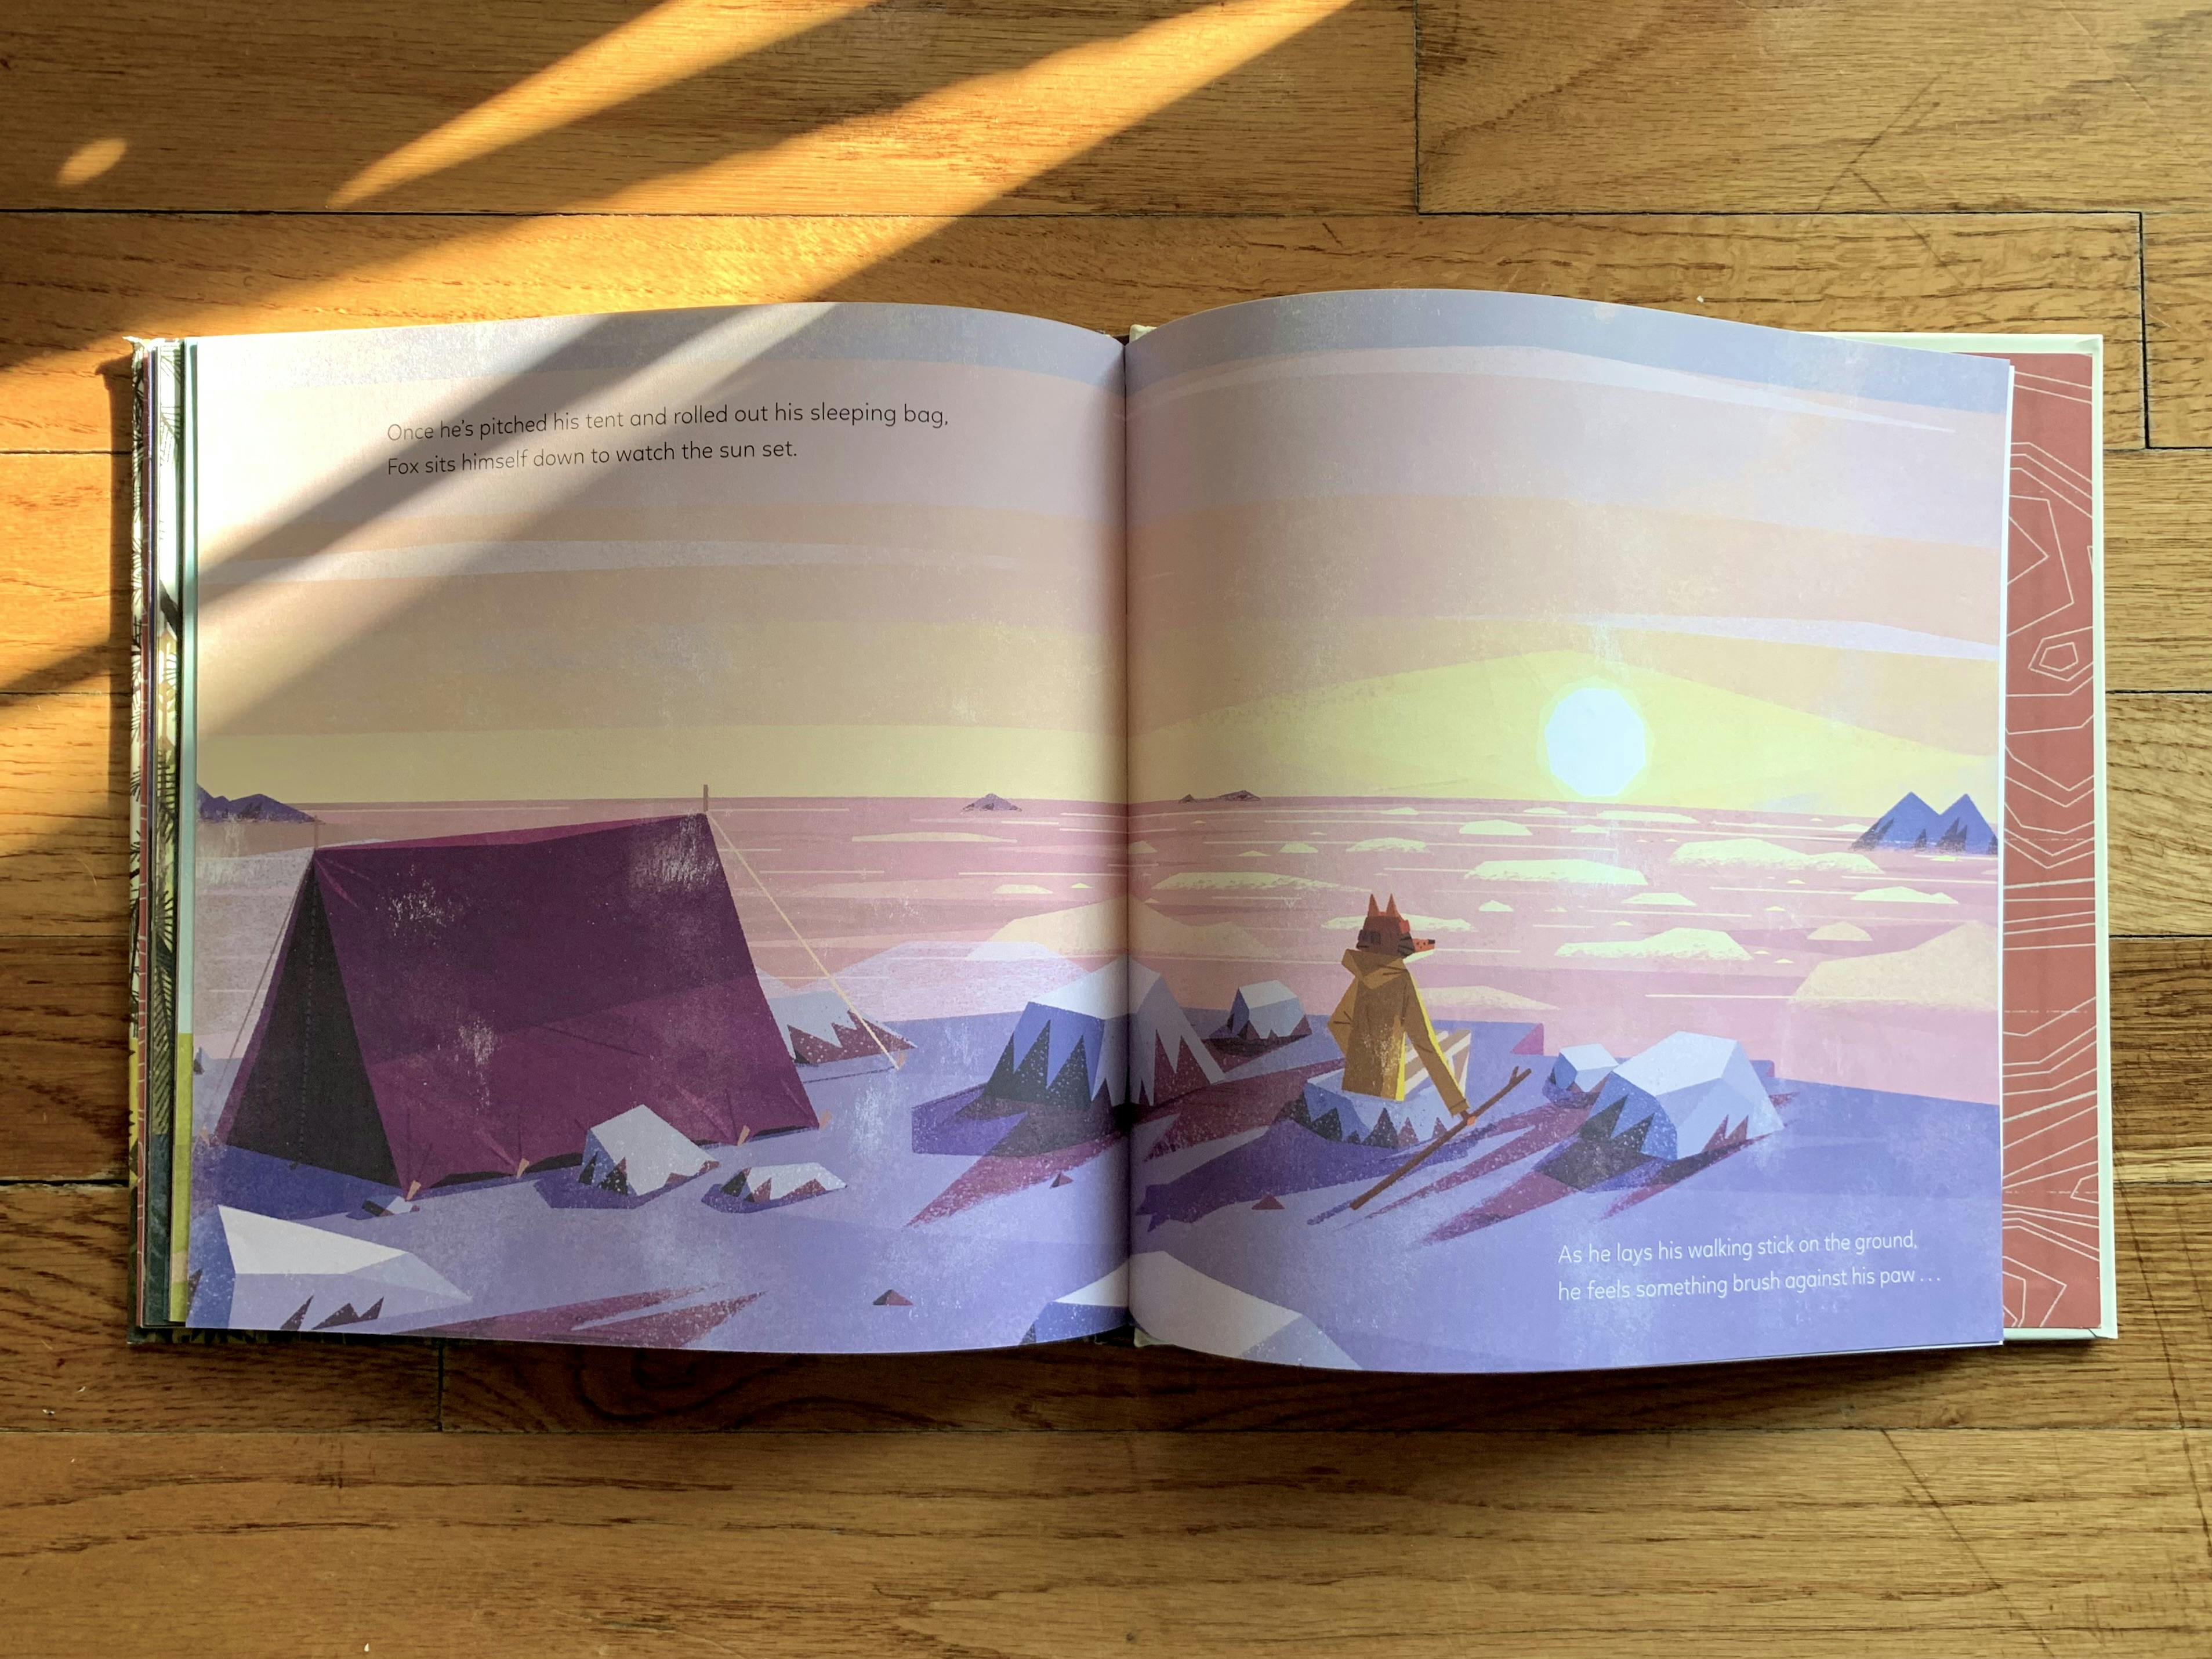 An inside spread of my copy of ‘The Golden Glow’. Fox sits on the peak of a mountain, watching the sun set. Peaks poke through the clouds in the distance.